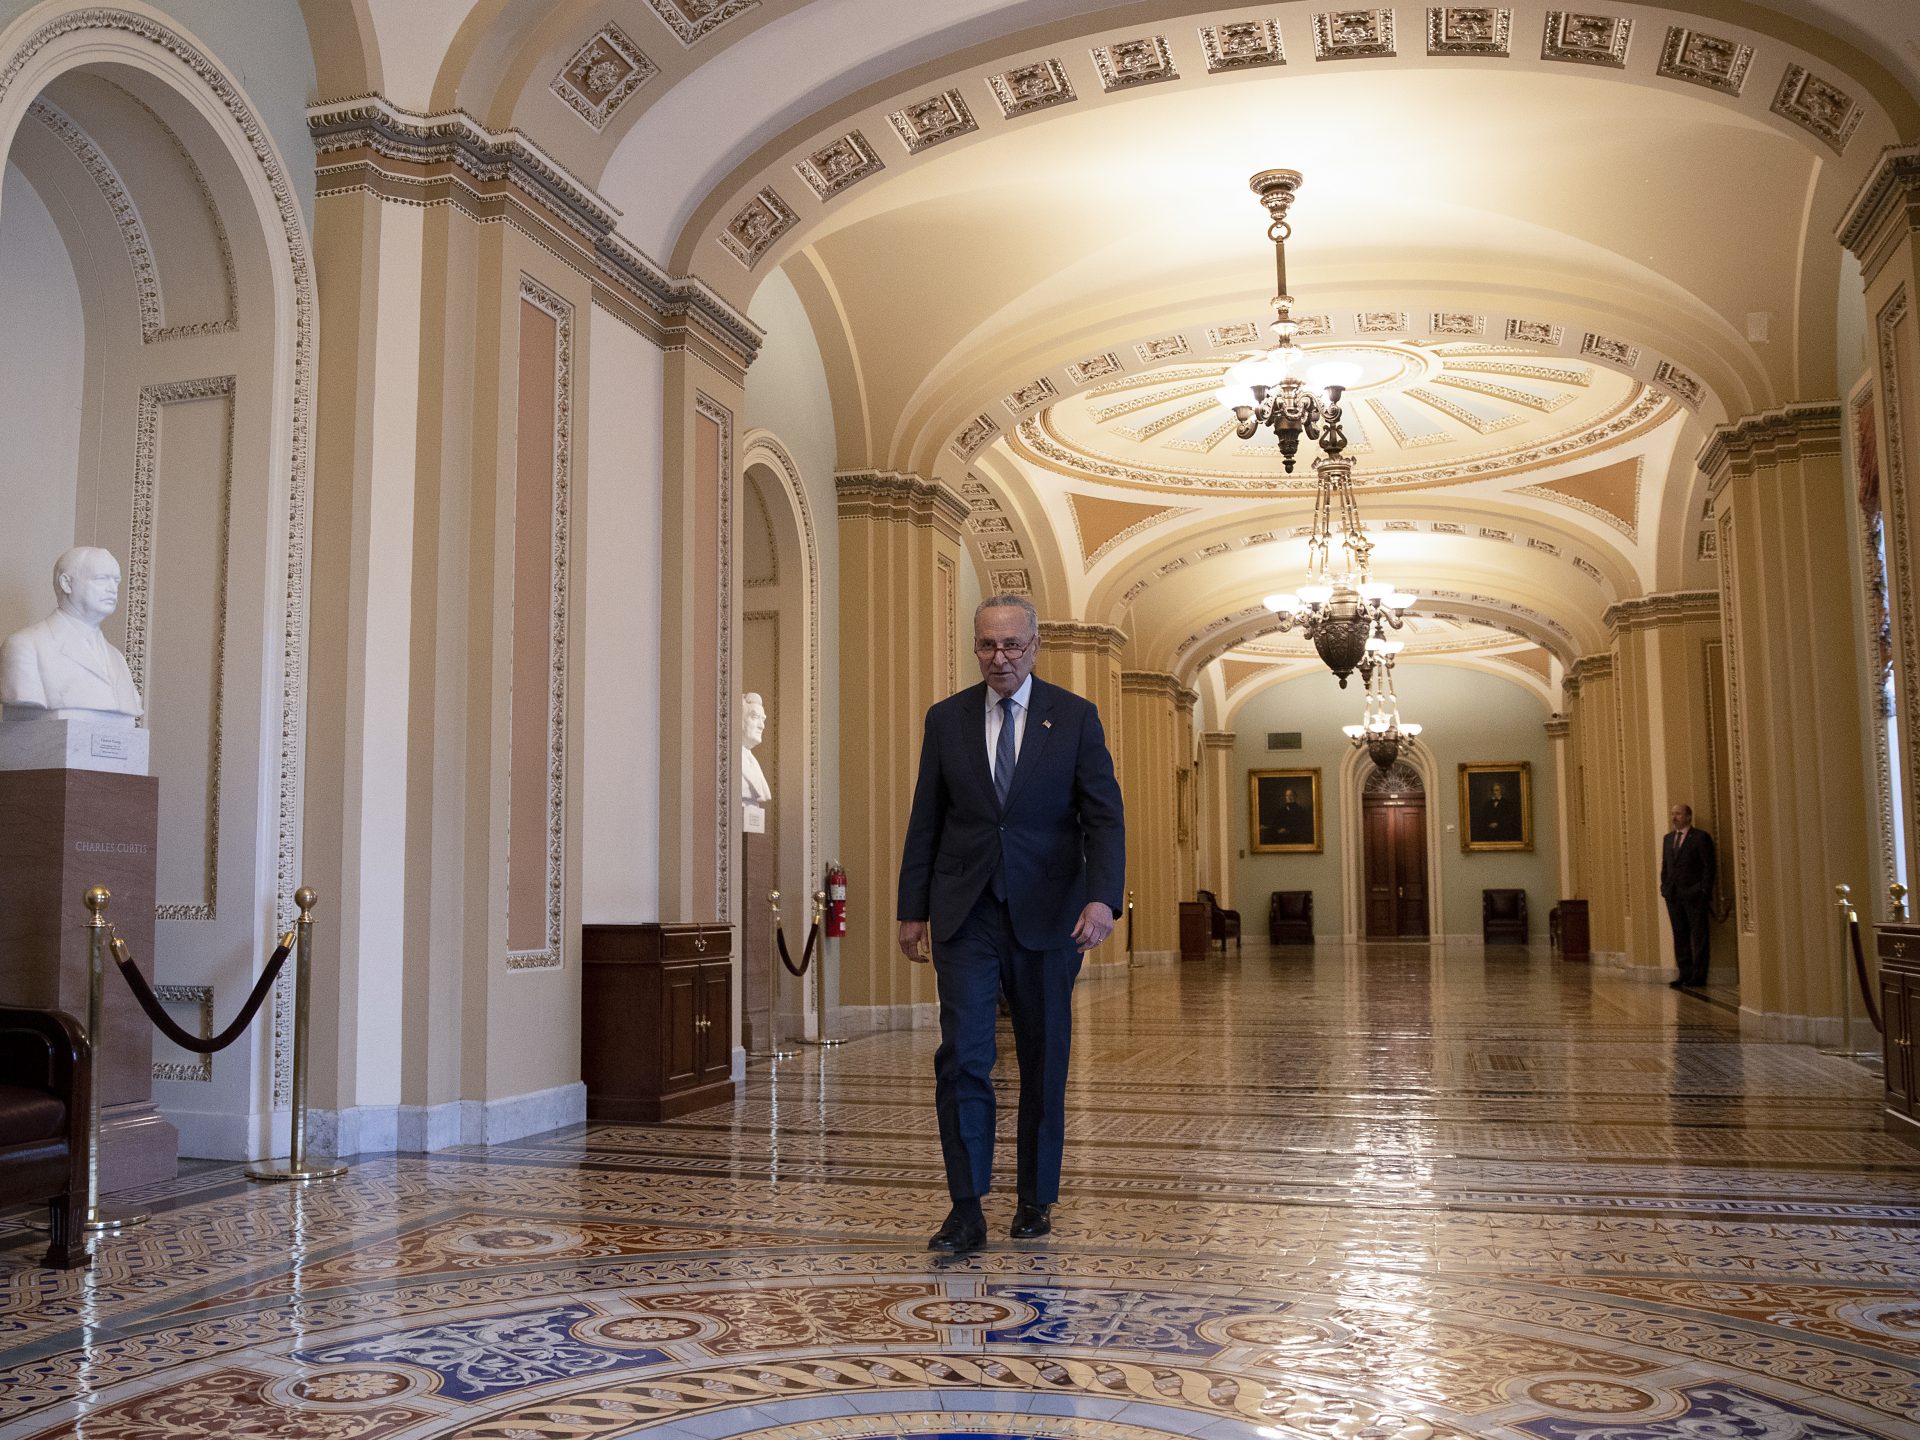 Senate Minority Leader Chuck Schumer, D-N.Y., walks from the Senate chamber at the U.S. Capitol on Friday.